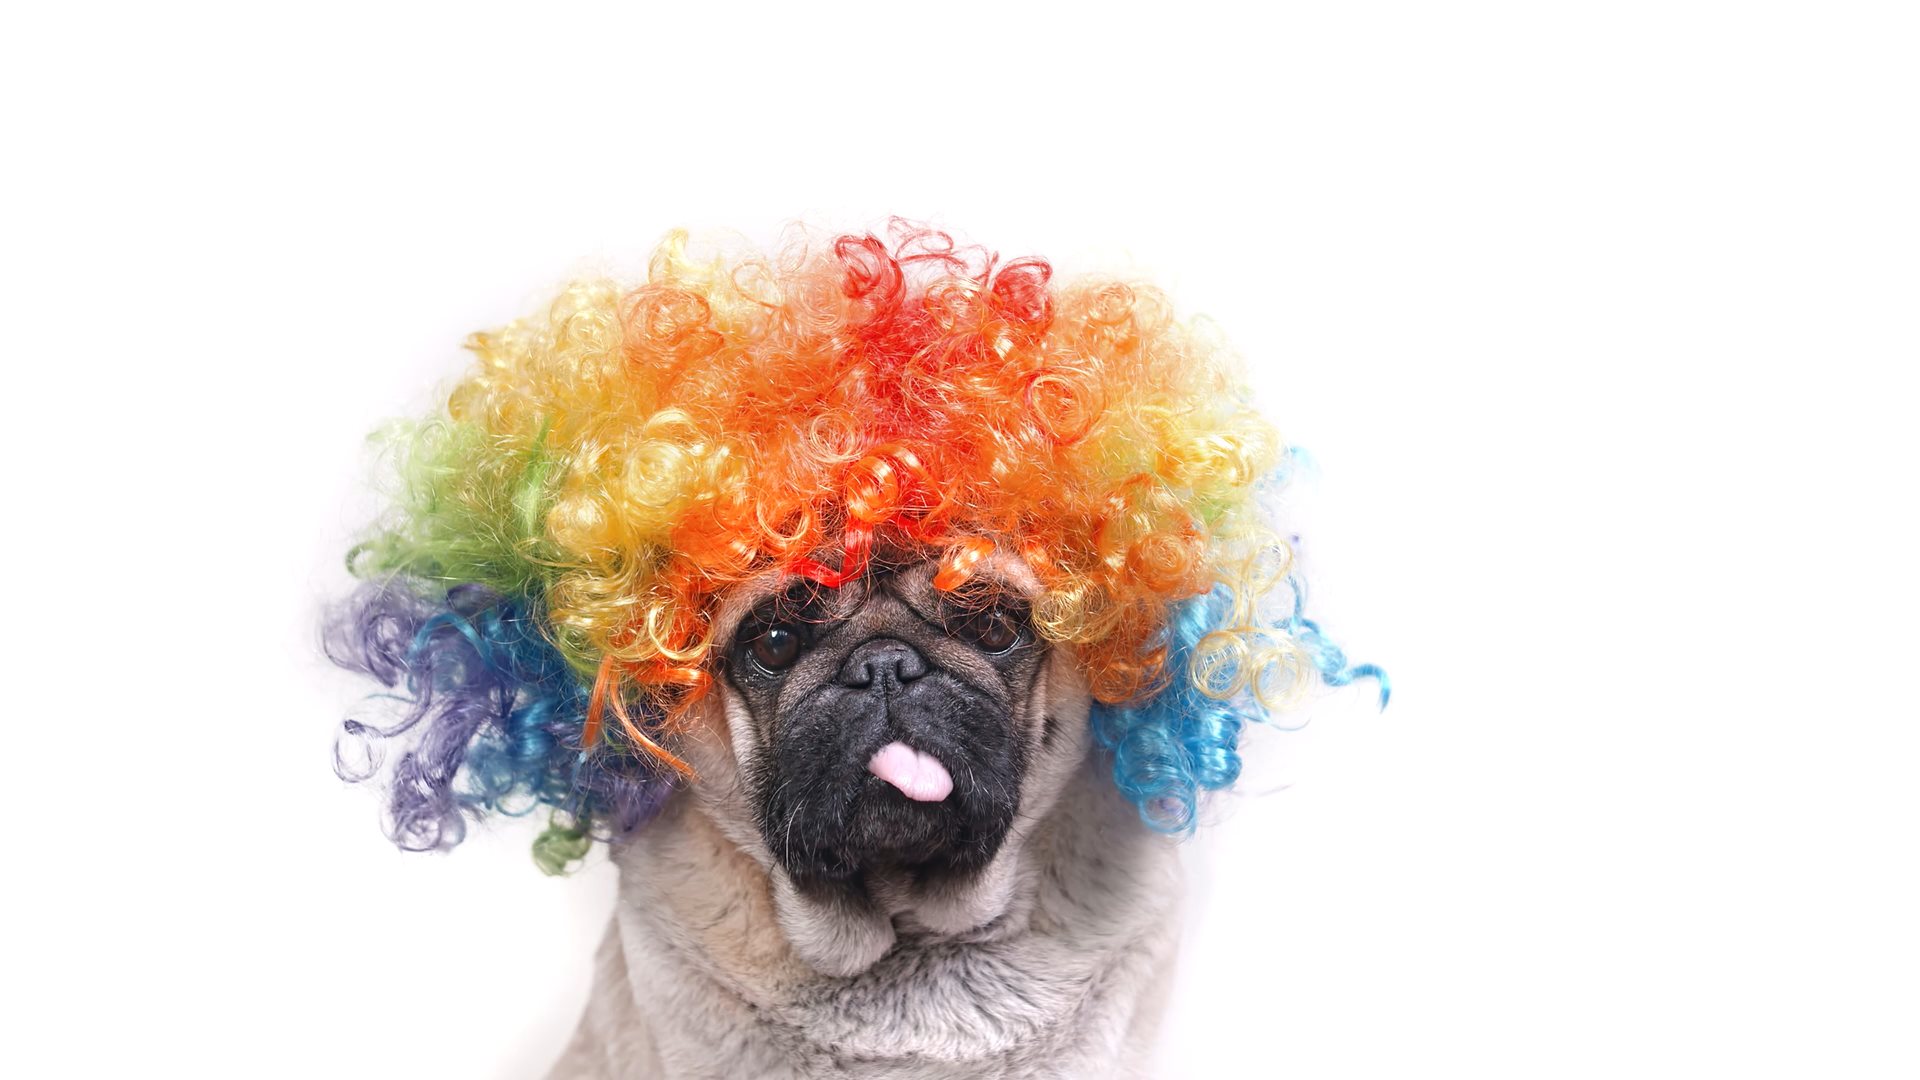 Video of a funny dog wearing a colorful wig